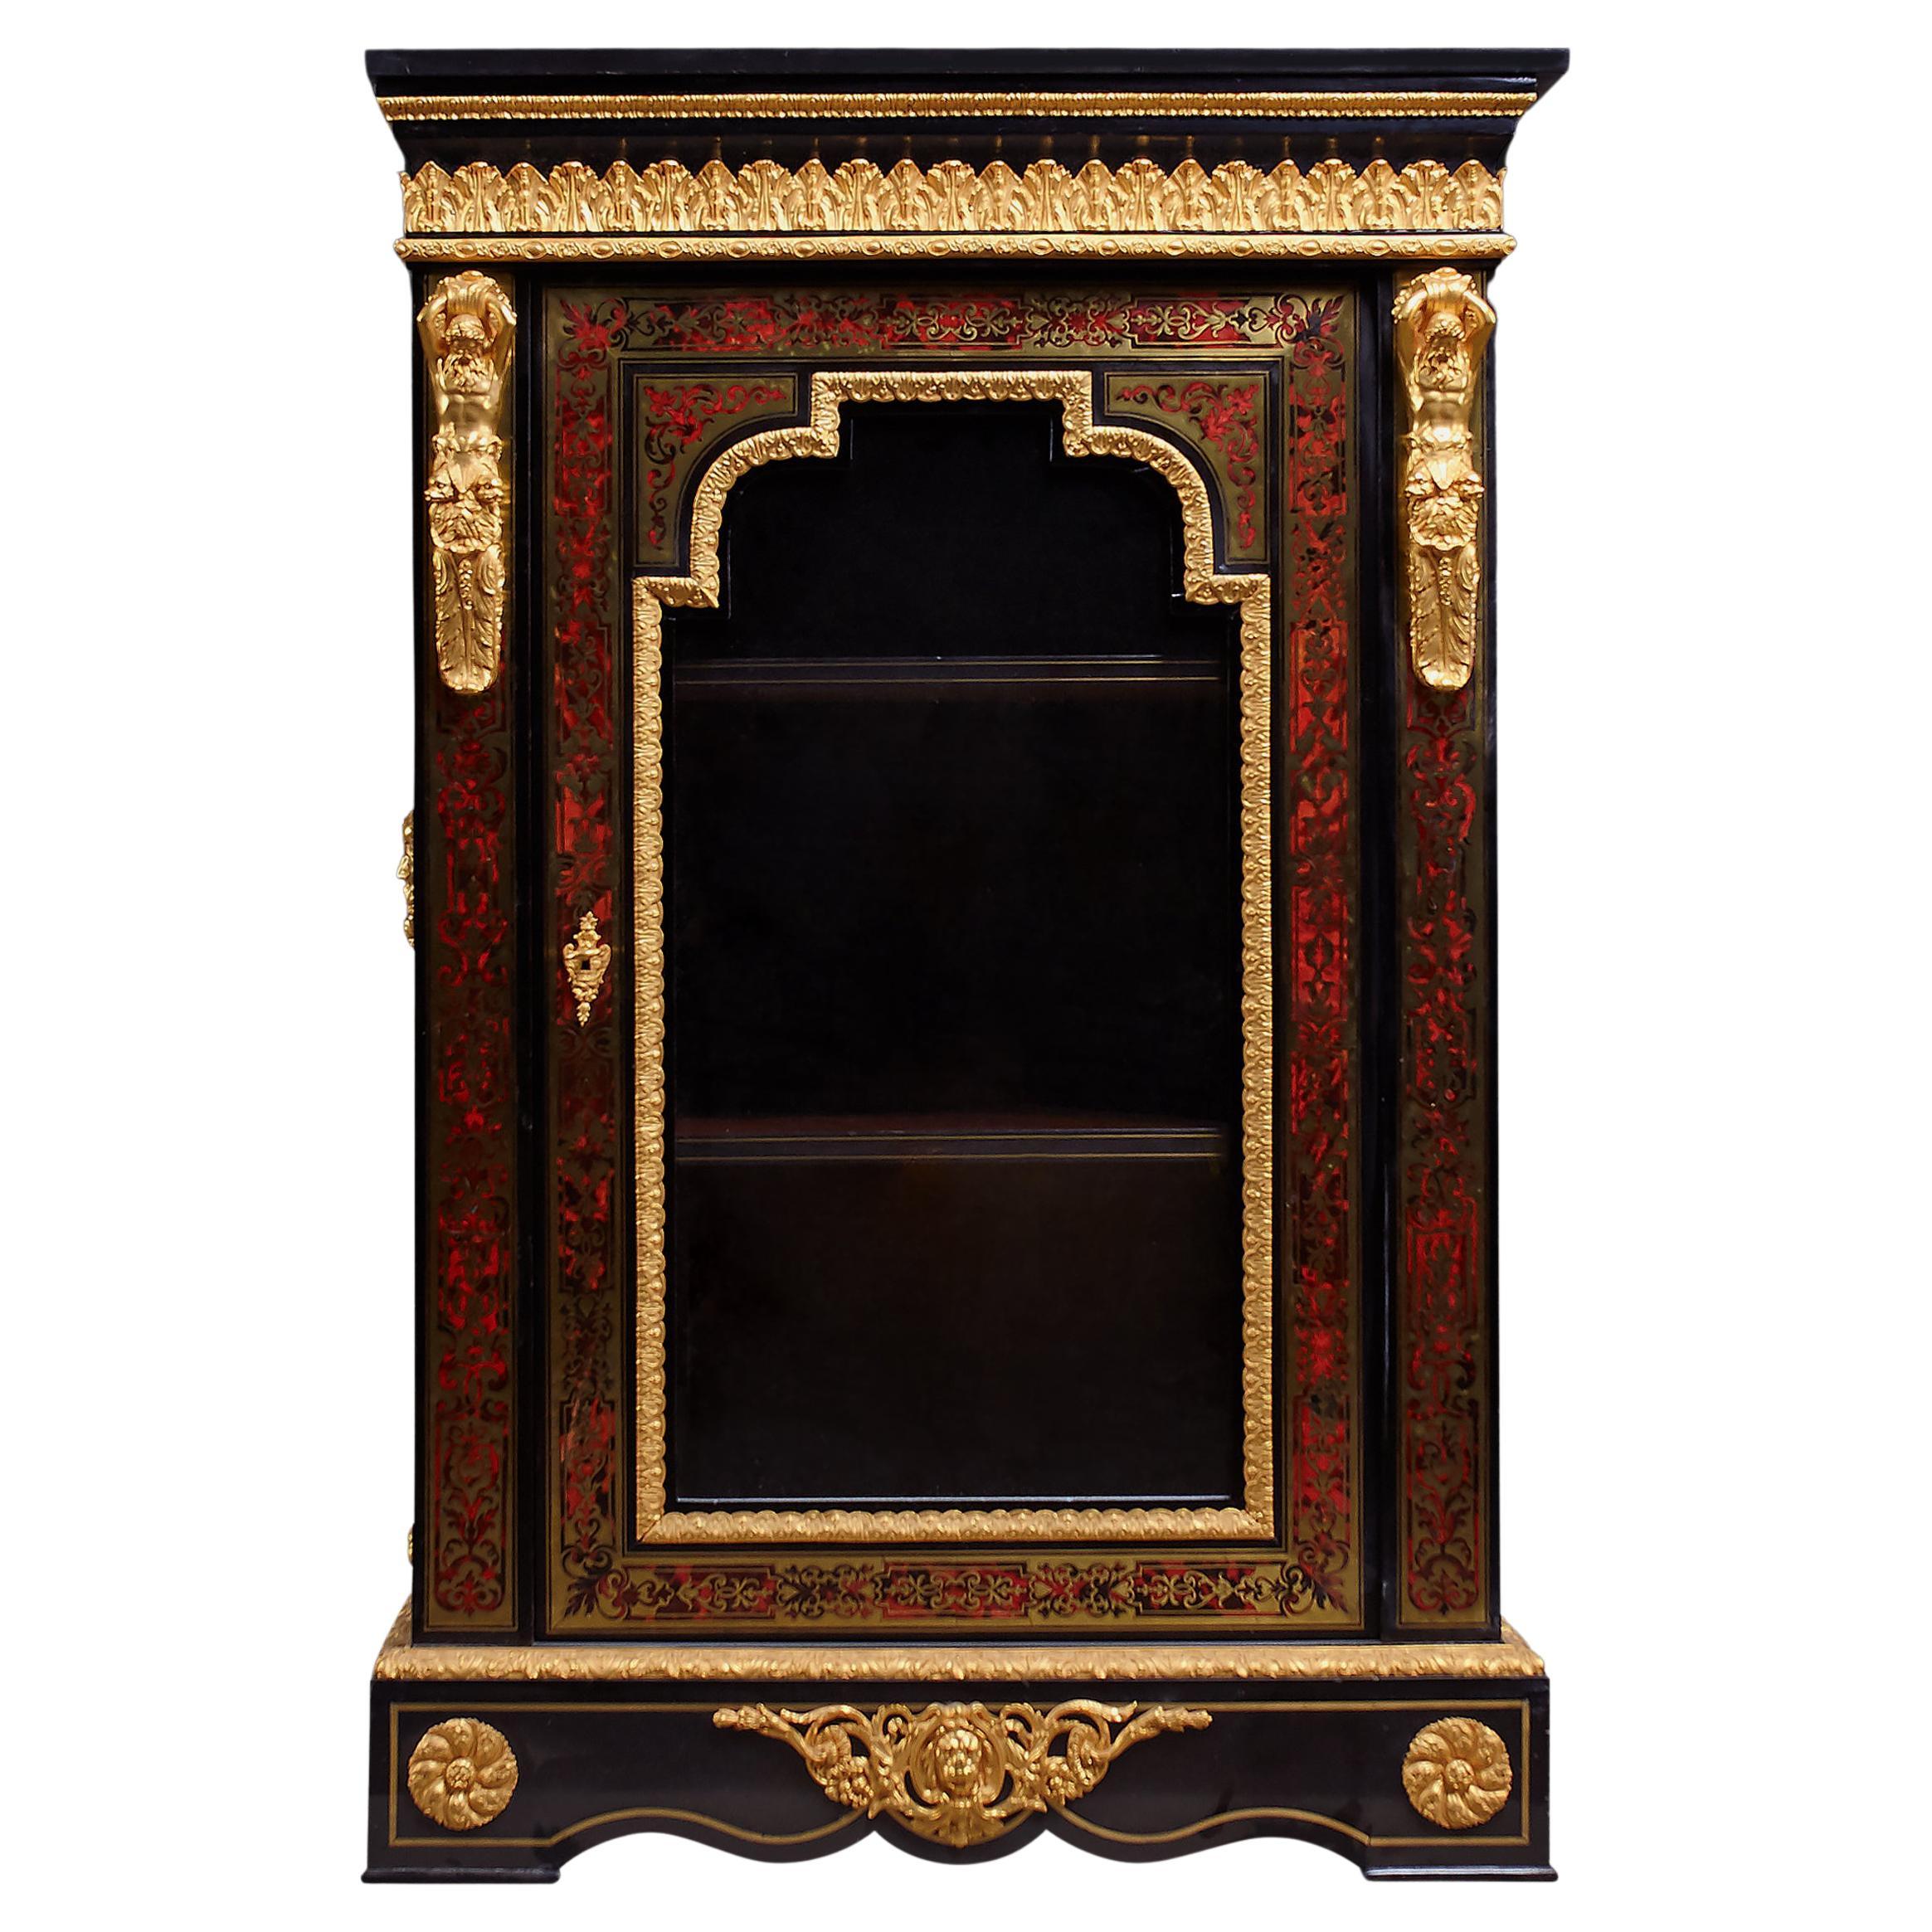 Commode Style Boulle of French 19th Century Napoleon III Period